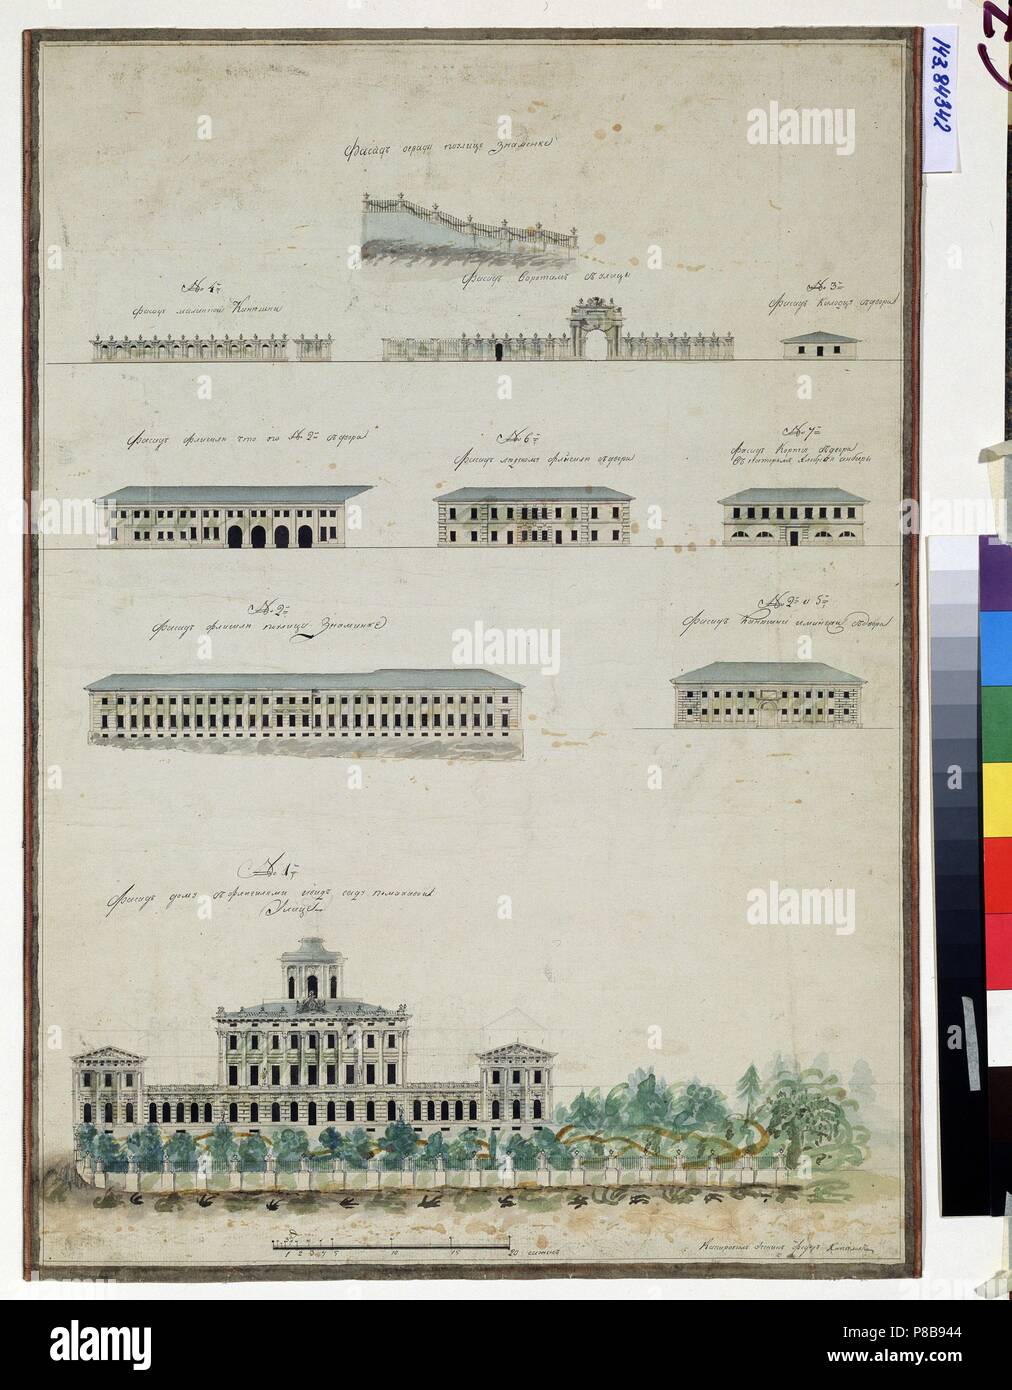 Facade Design of the Pashkov House in Moscow. Museum: State A. Pushkin Museum of Fine Arts, Moscow. Stock Photo